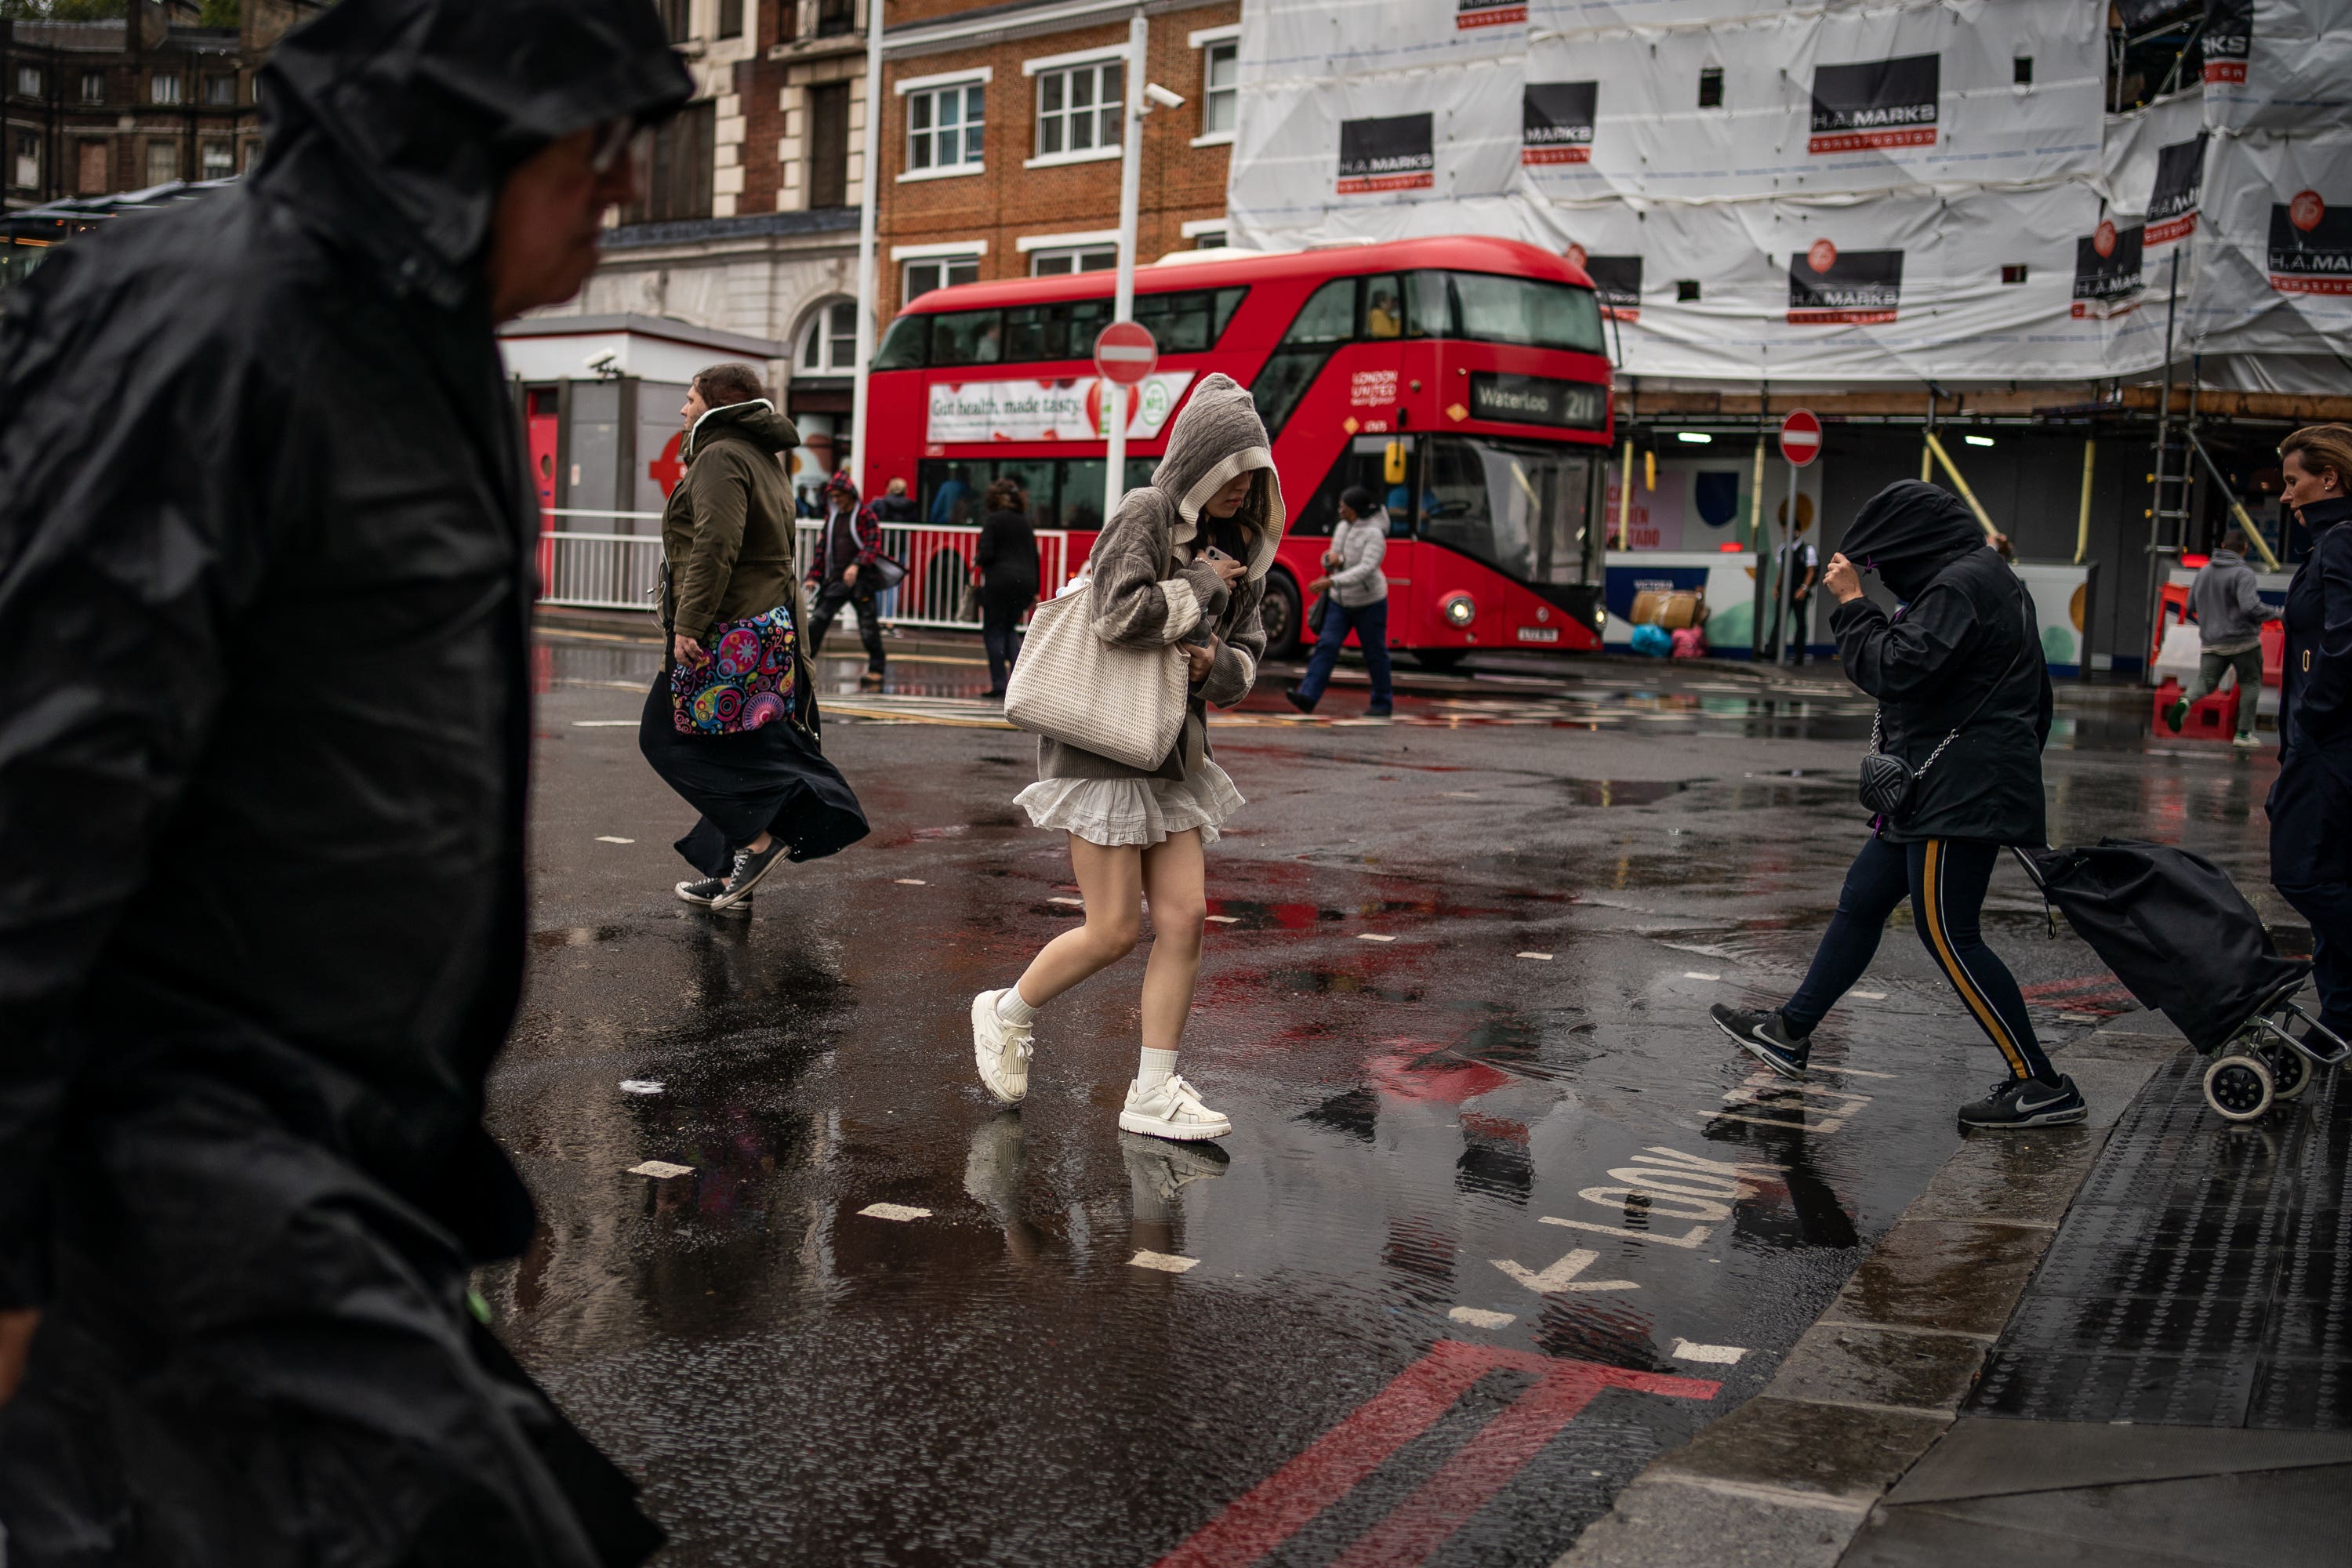 People walk through the rain and wet weather in Victoria, London (Aaron Chown/PA)